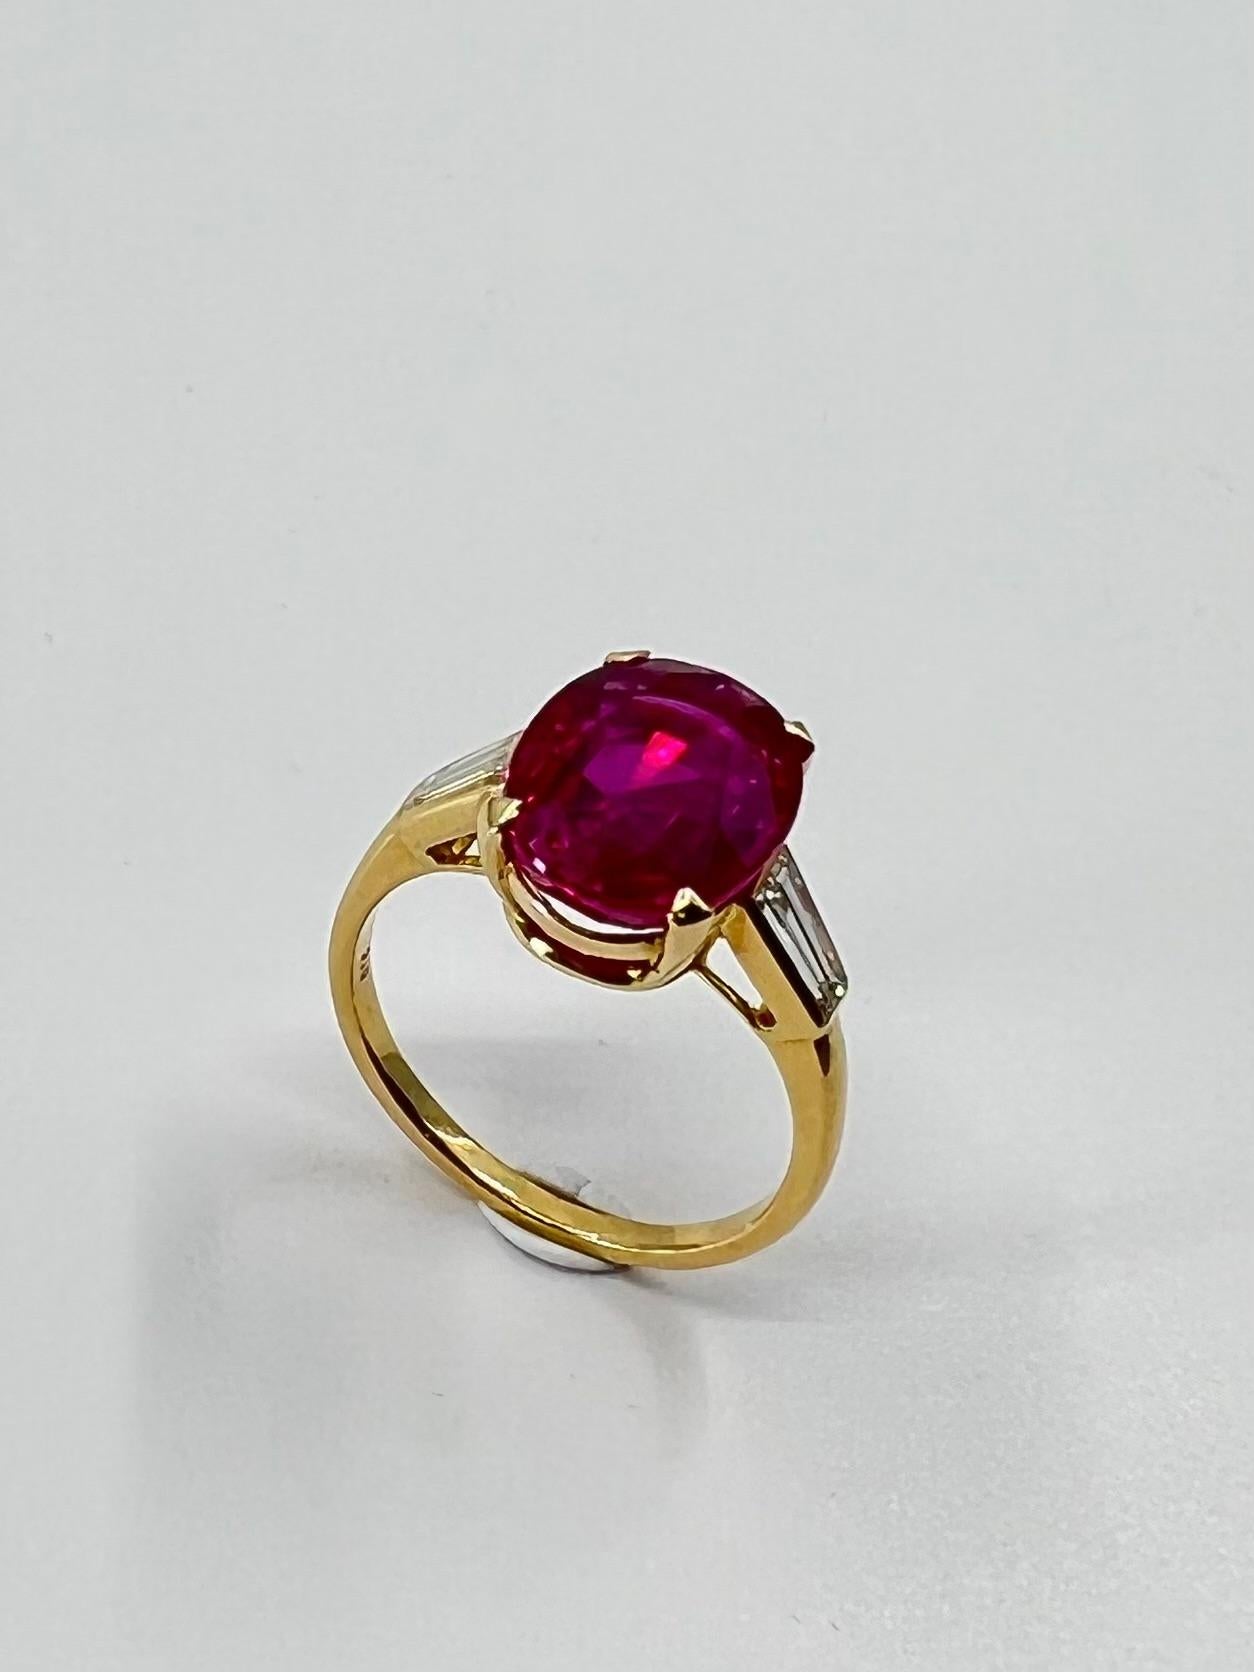 Contemporary Certified 5 Carat Burma No Heat Pink Red Ruby & Diamond Ring, Crystal Clean!